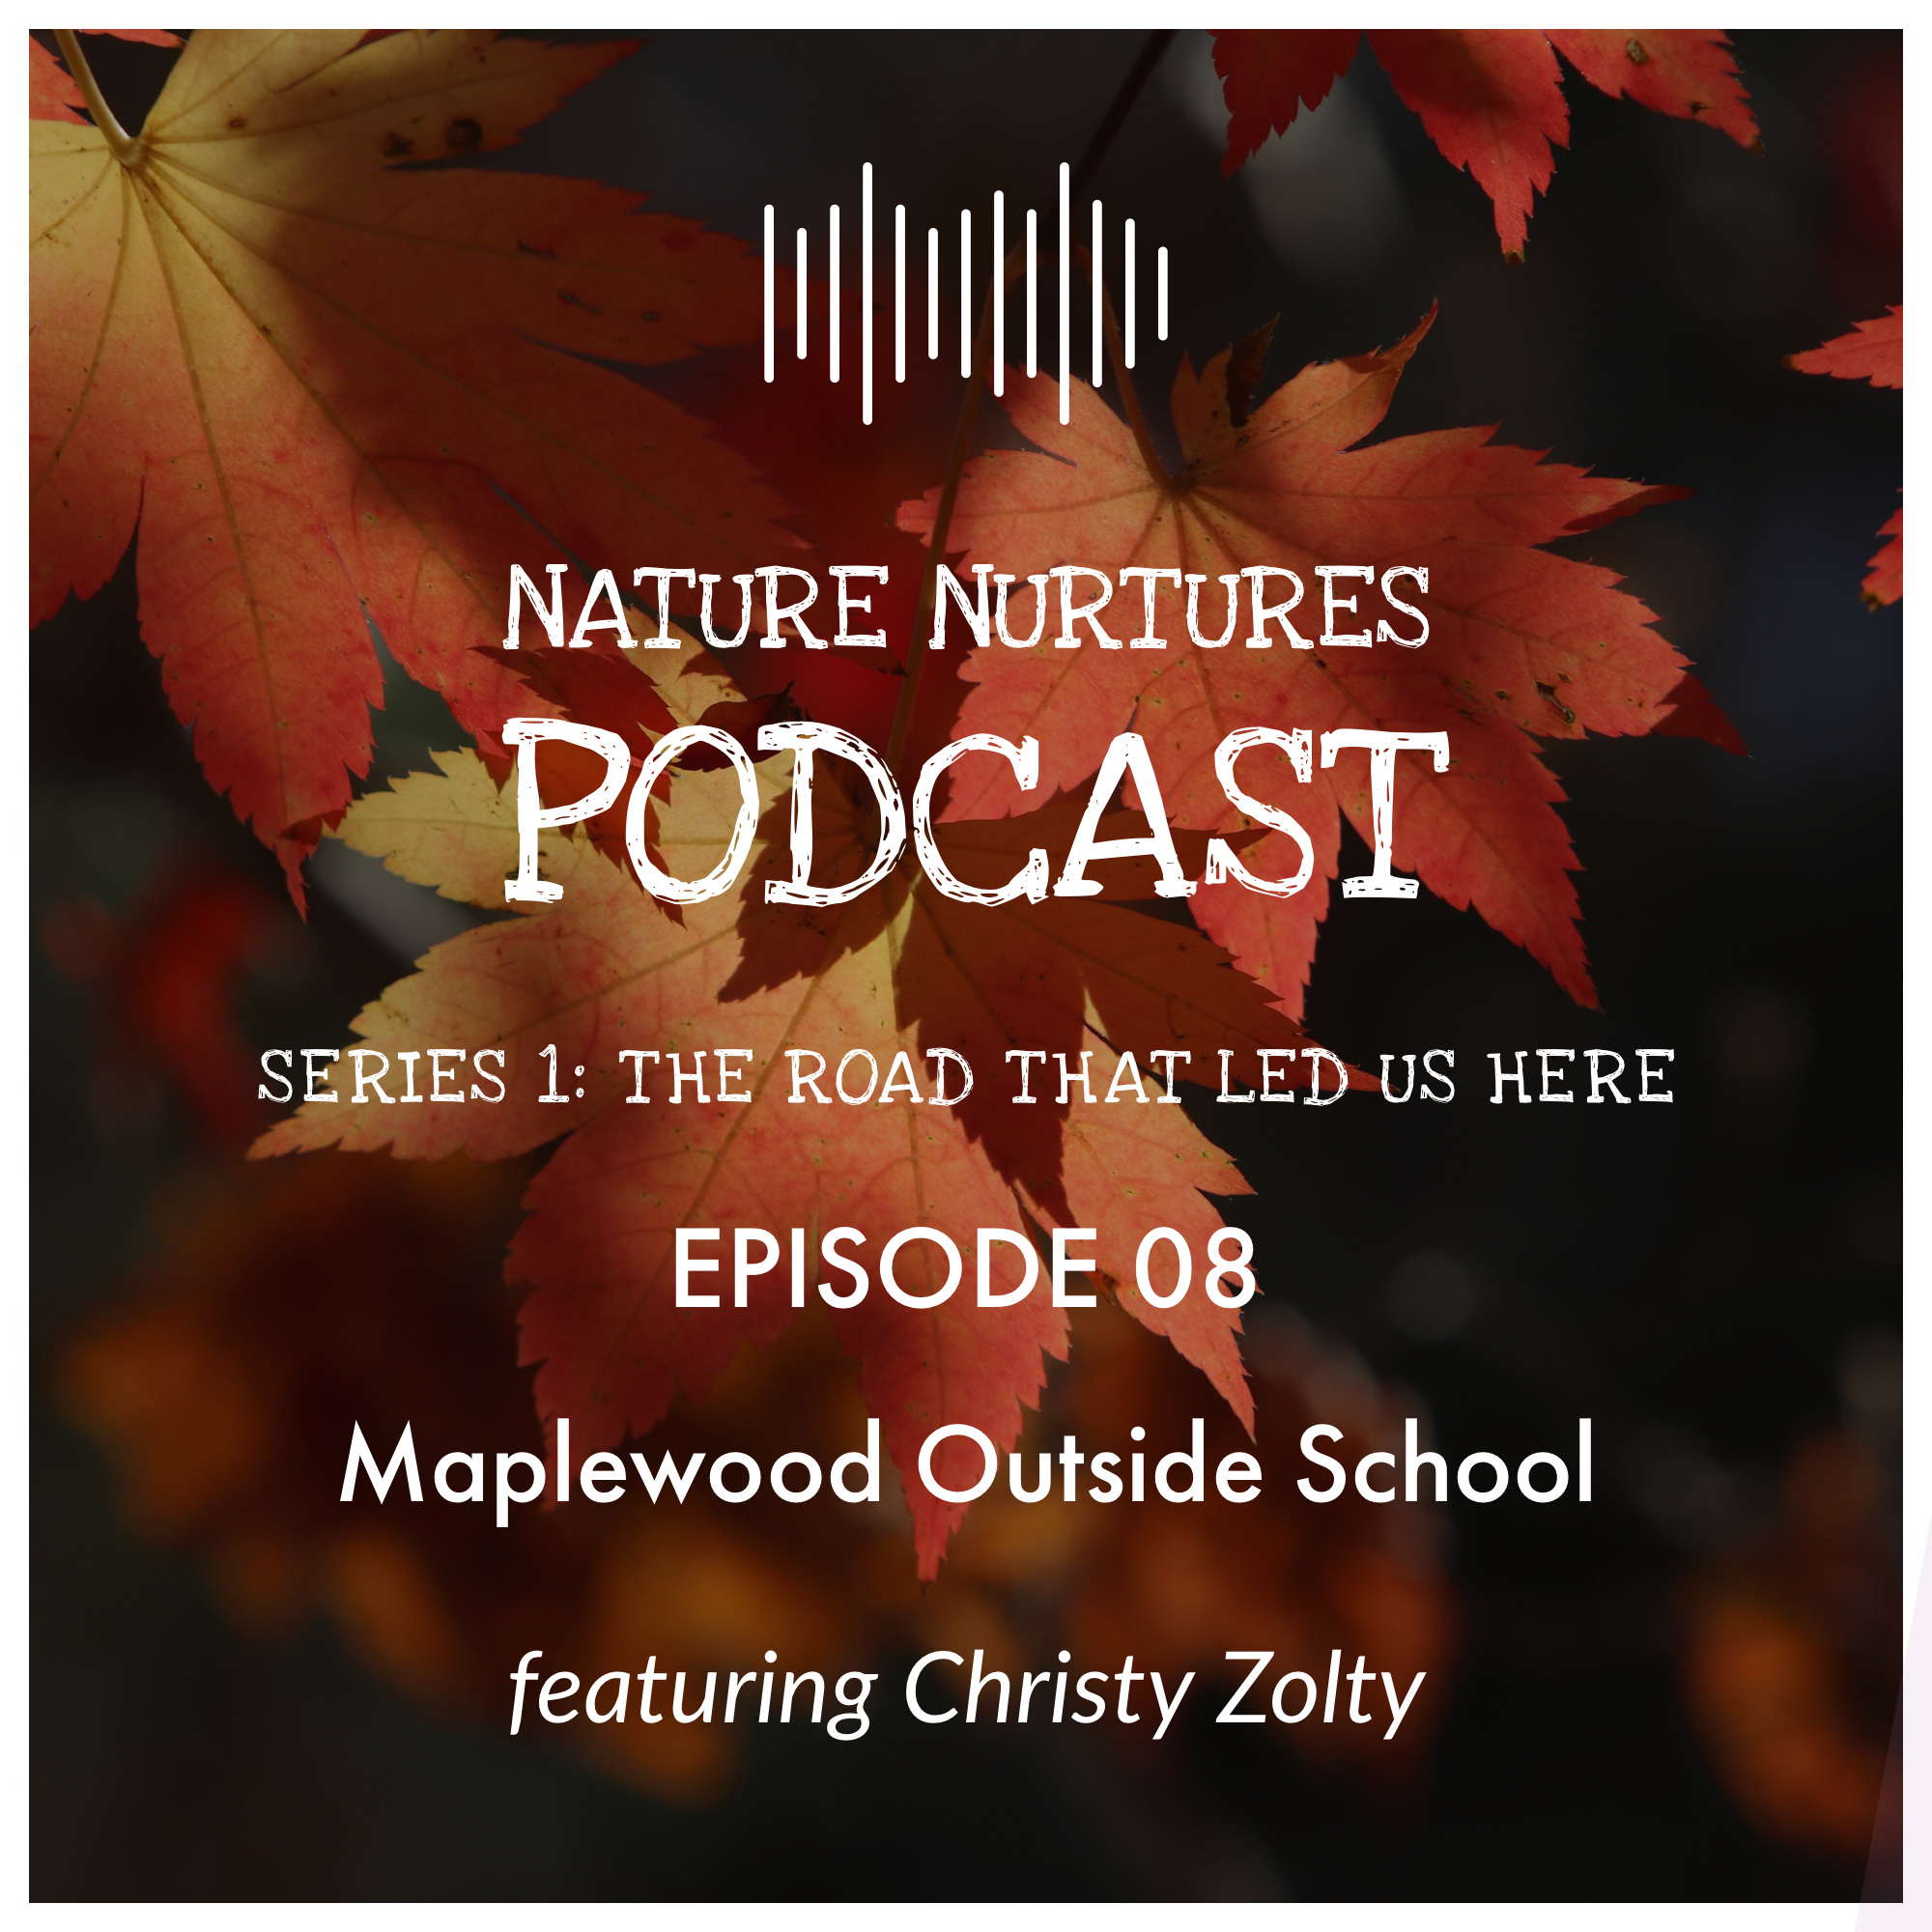 Maplewood Outside School: Finding the Right Balance